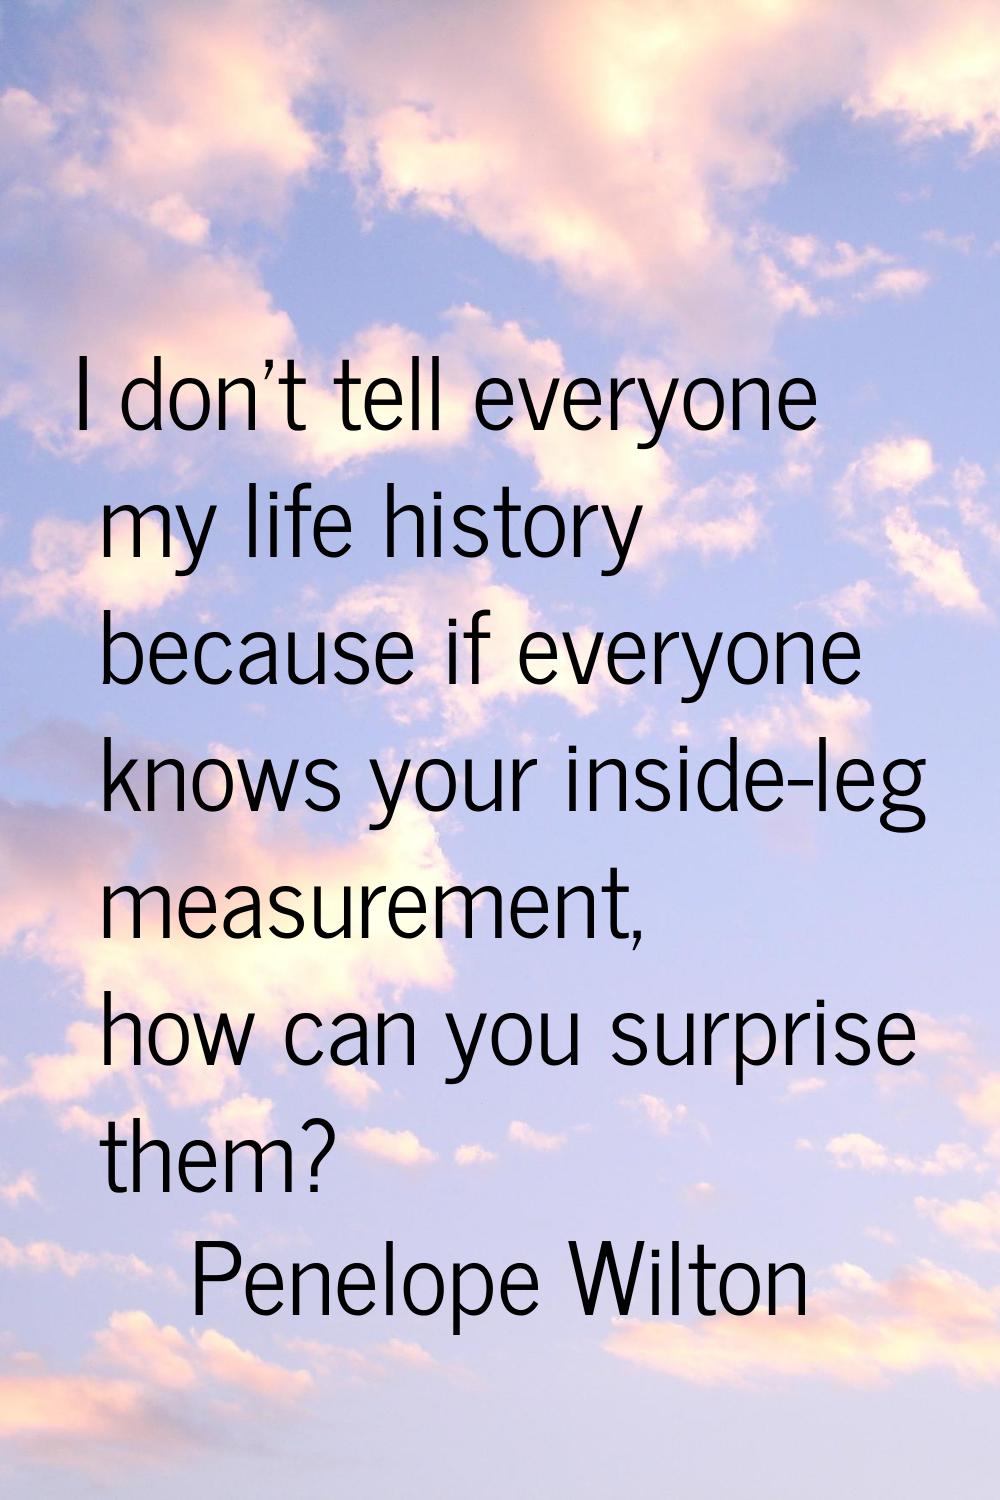 I don't tell everyone my life history because if everyone knows your inside-leg measurement, how ca